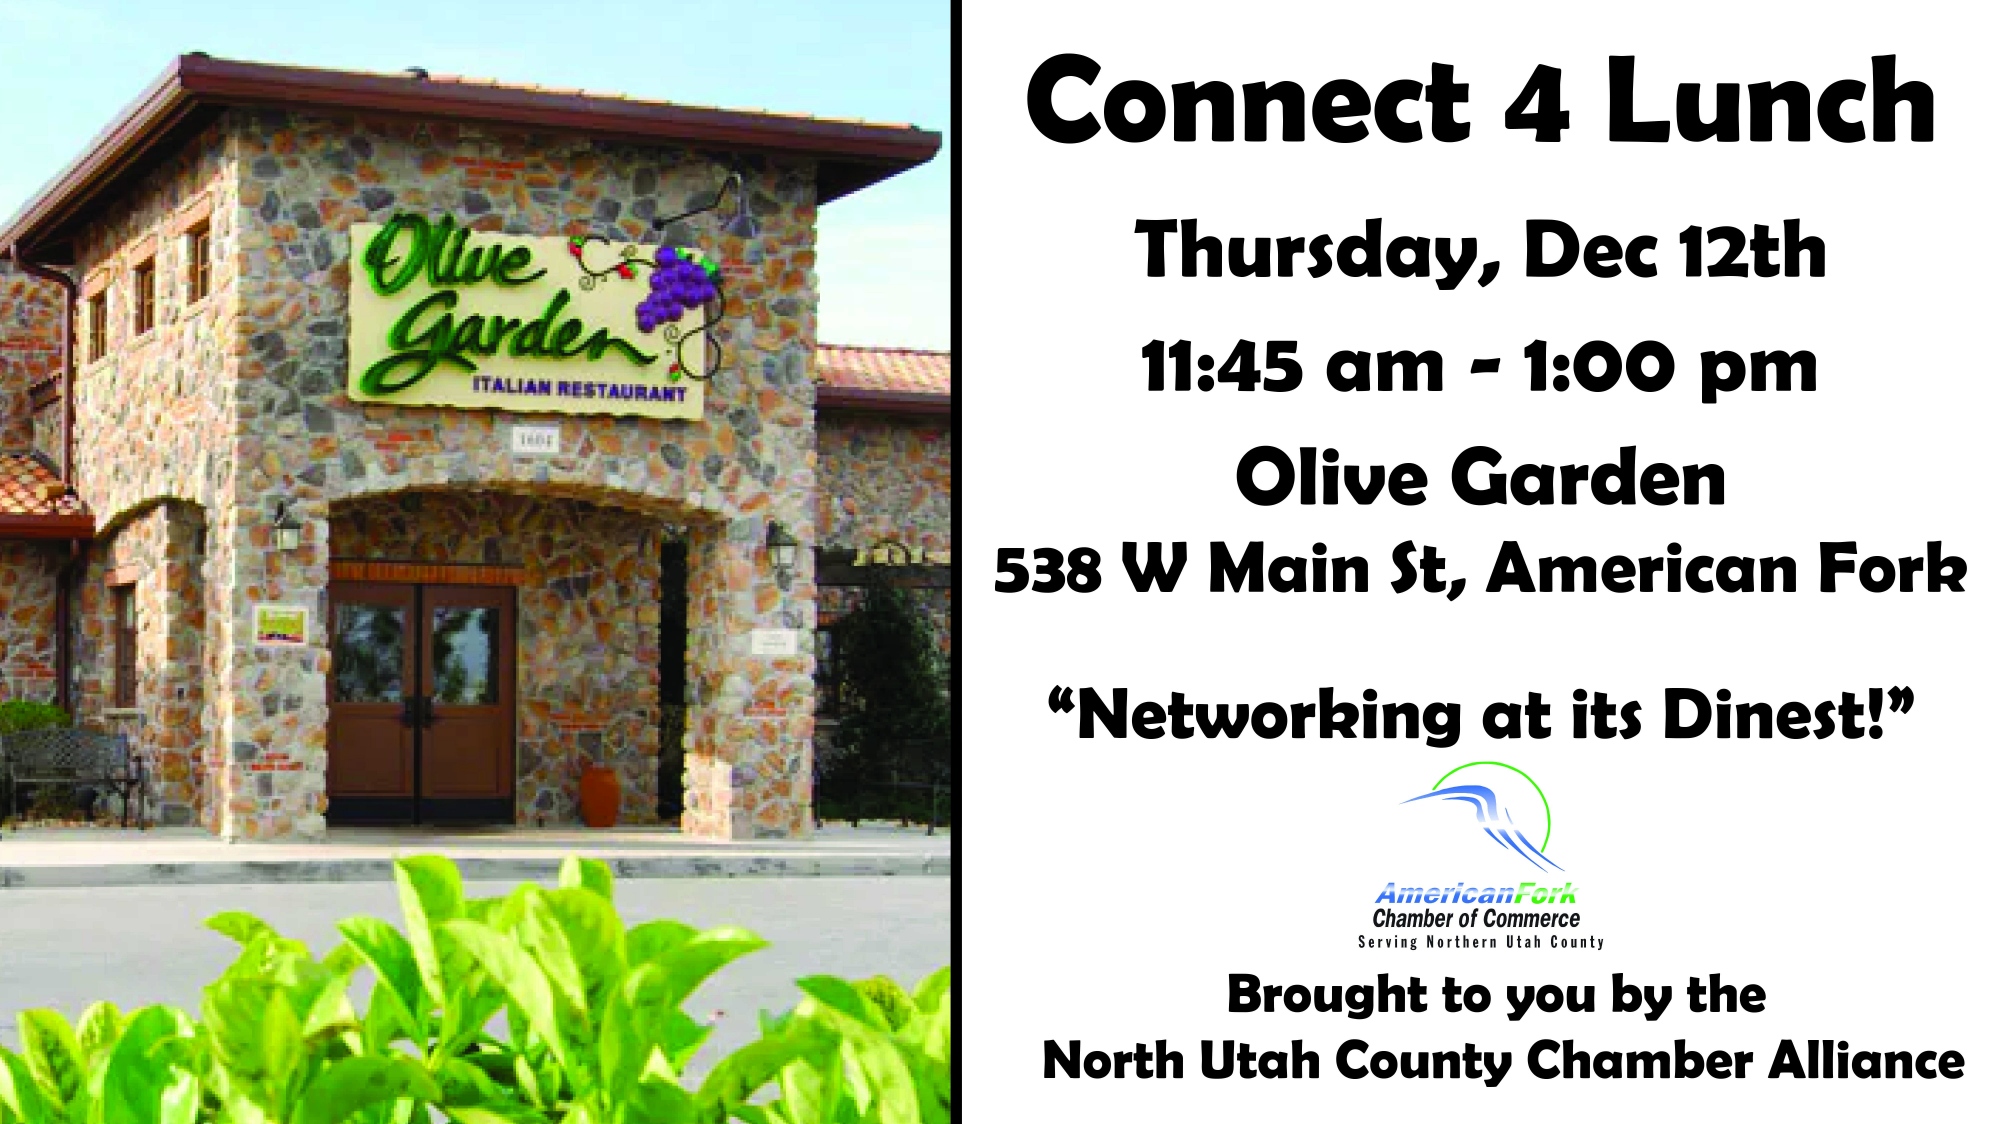 American Fork Chamber Of Commerce Event Information